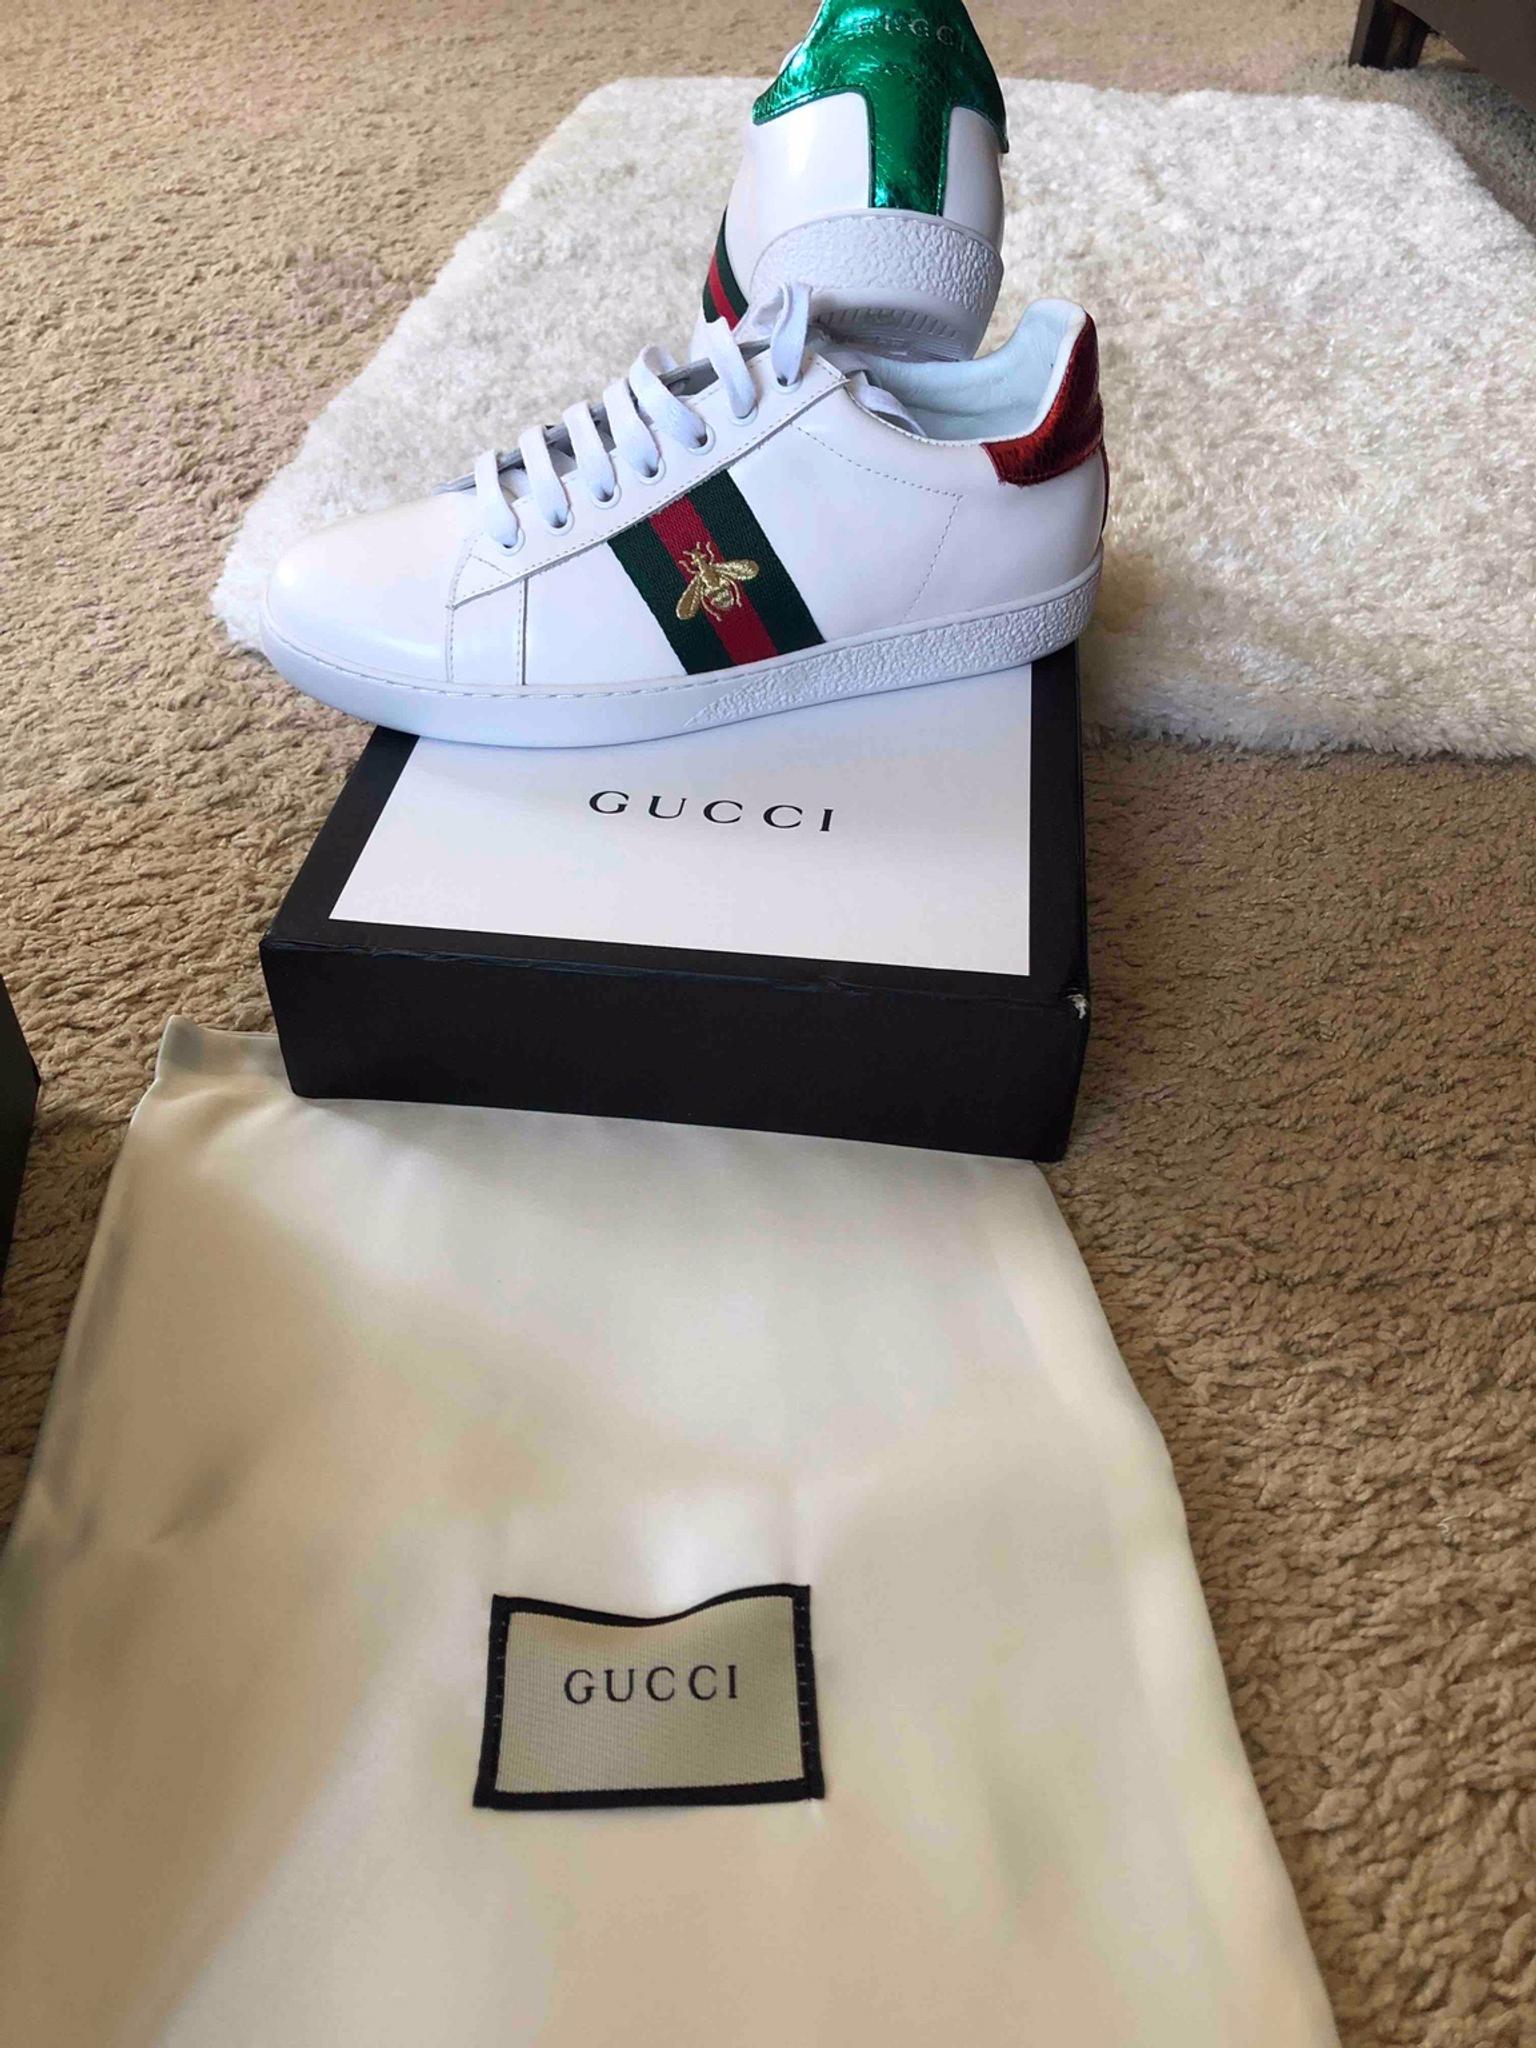 gucci shoes price in london